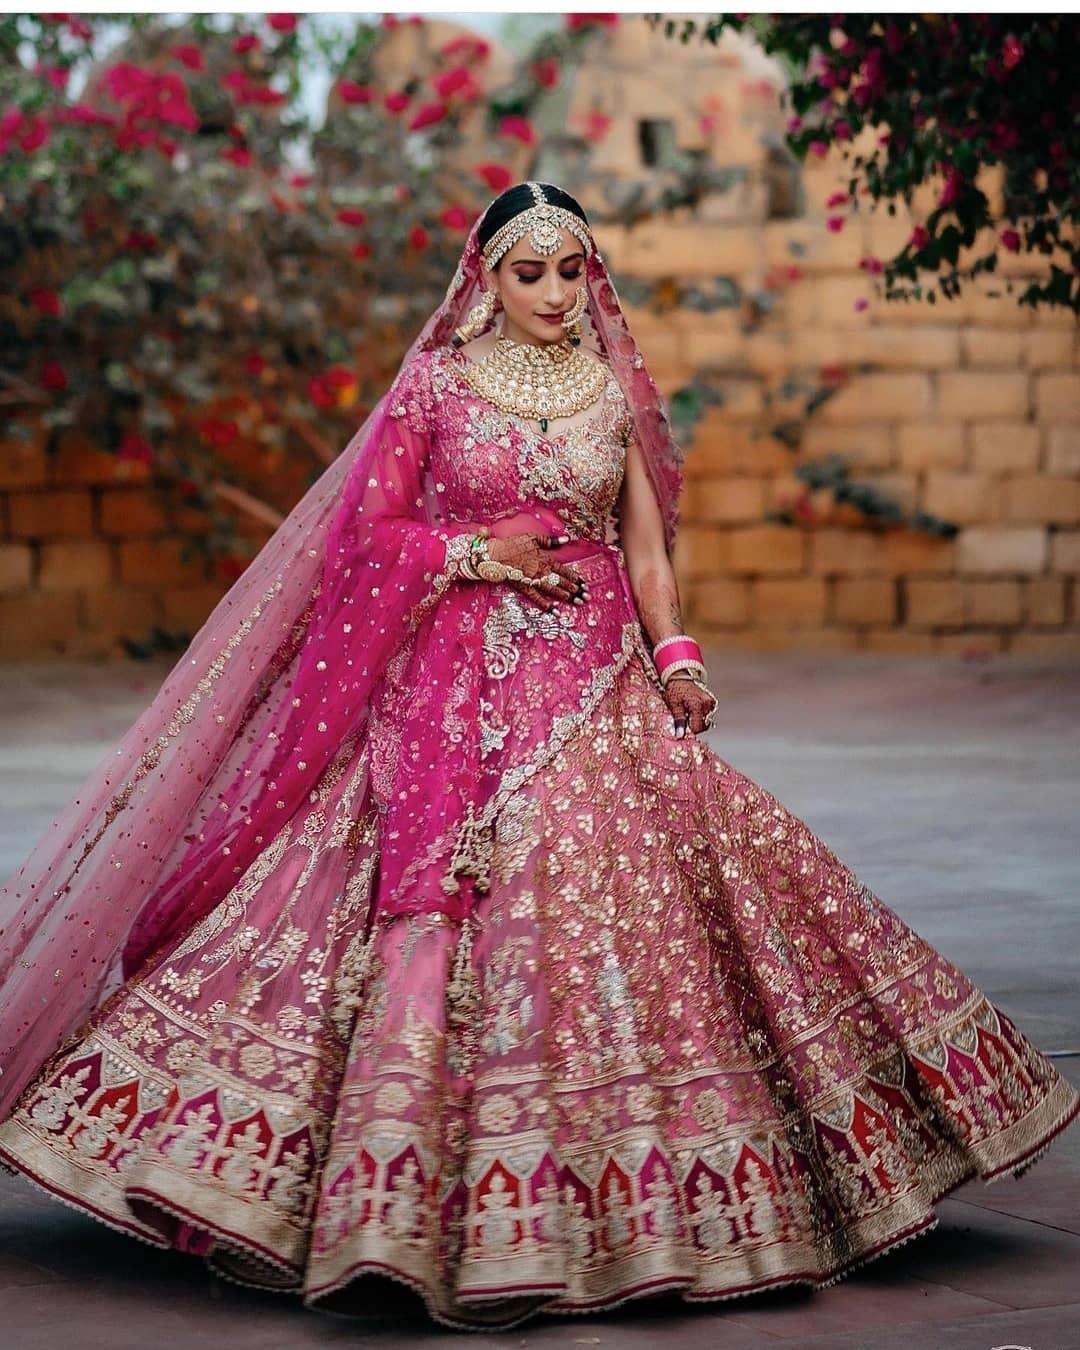 Vivaah Surat - Sarees, Salwar kameez and Wedding Lehenga Choli - Exclusive  New Bridal Collections which make your HOT Pink which has silver embroidery  on it and it is a perfect combination